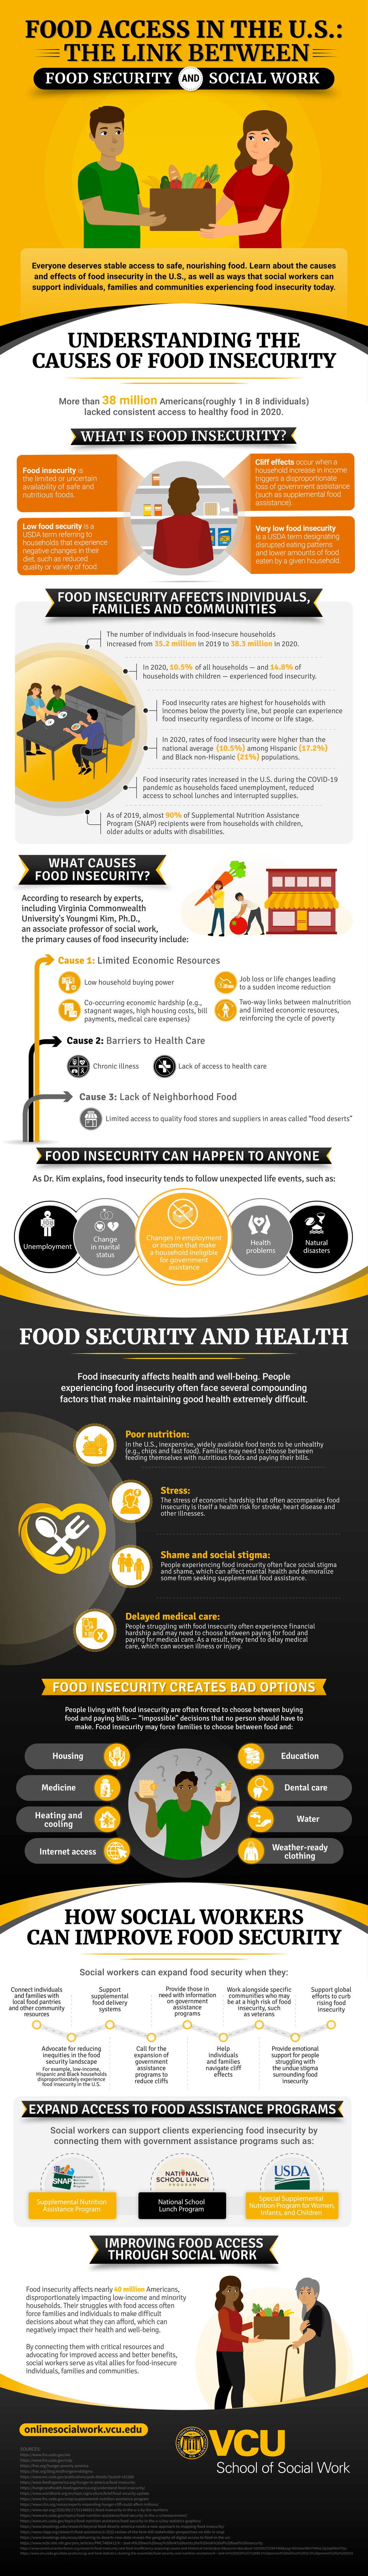 An infographic providing an overview of food insecurity in the U.S. and addressing the major causes of food insecurity (such as limited economic resources and inadequate access to health care), as well as actions social workers take to promote food security.